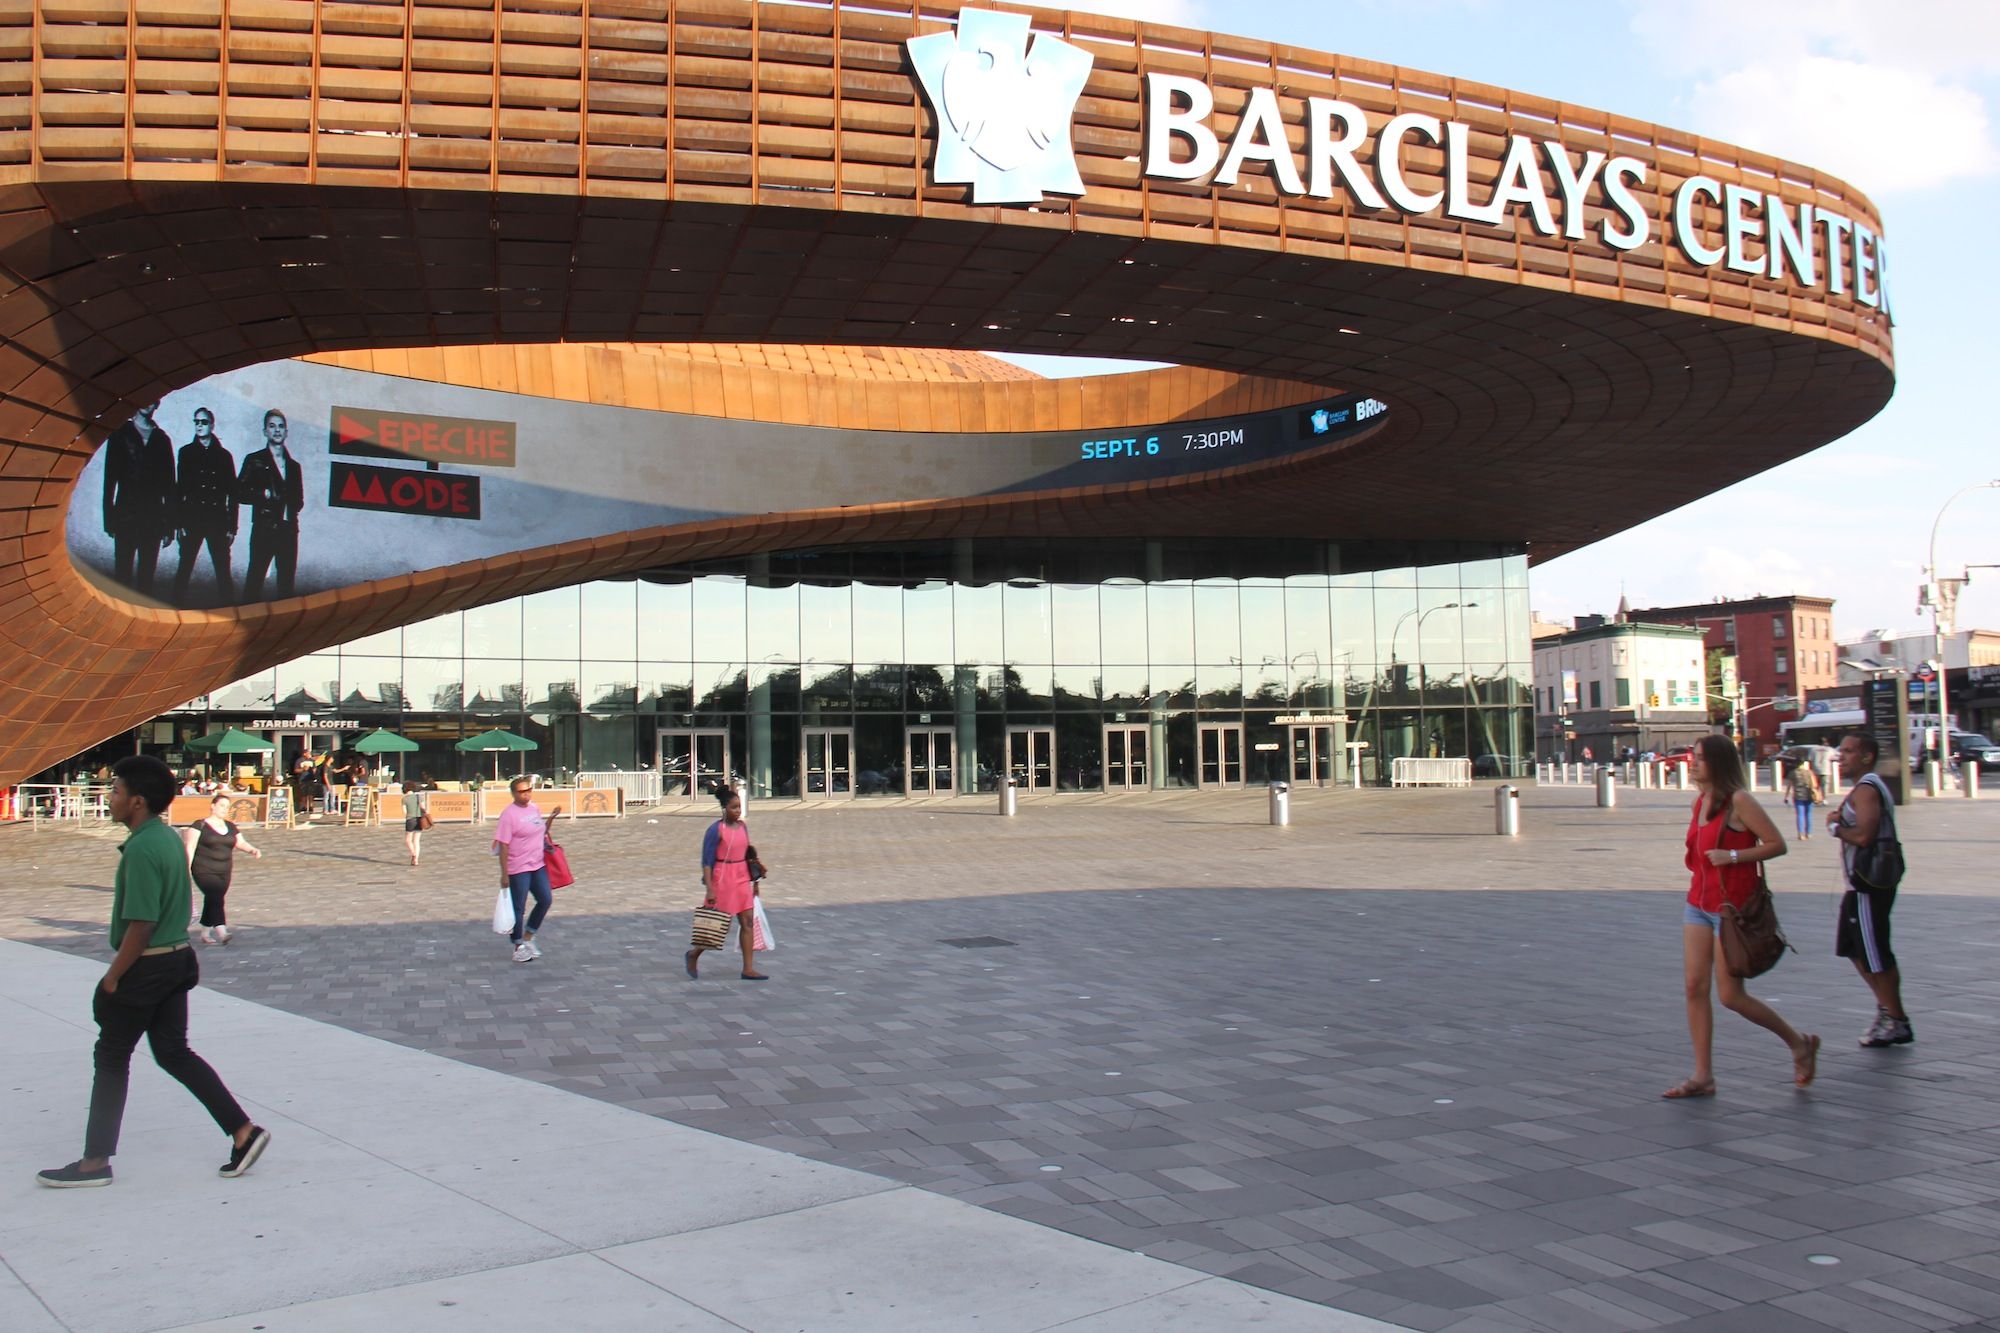 What To Look Out For Around Barclays When The NBA All-Star Game Comes To Town